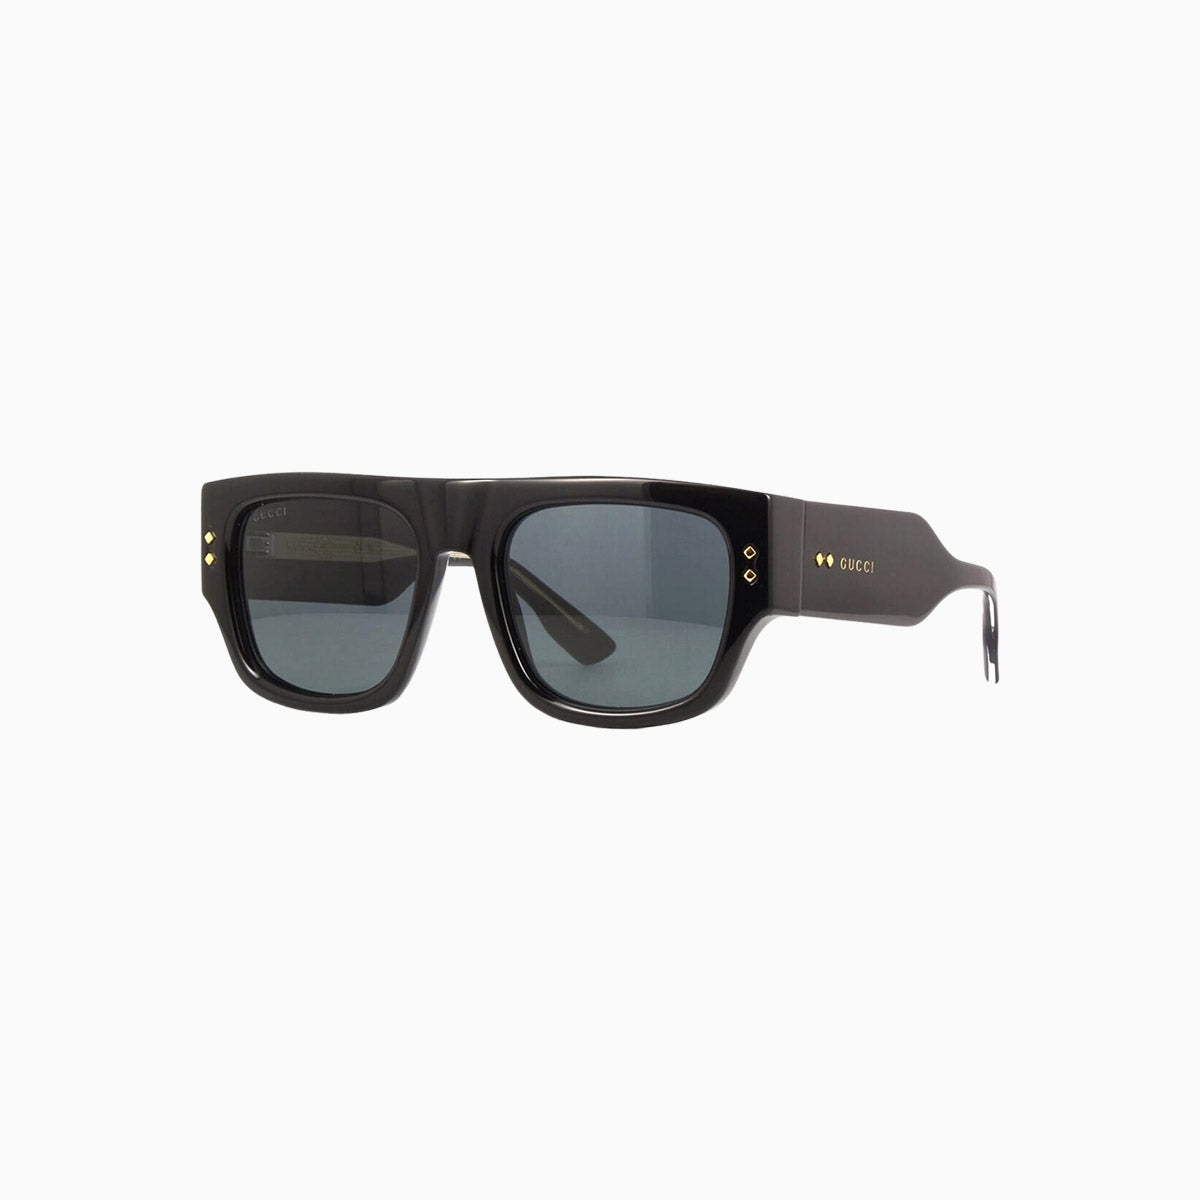 mens-recycled-ace-man-sunglasses-gg1262s-001